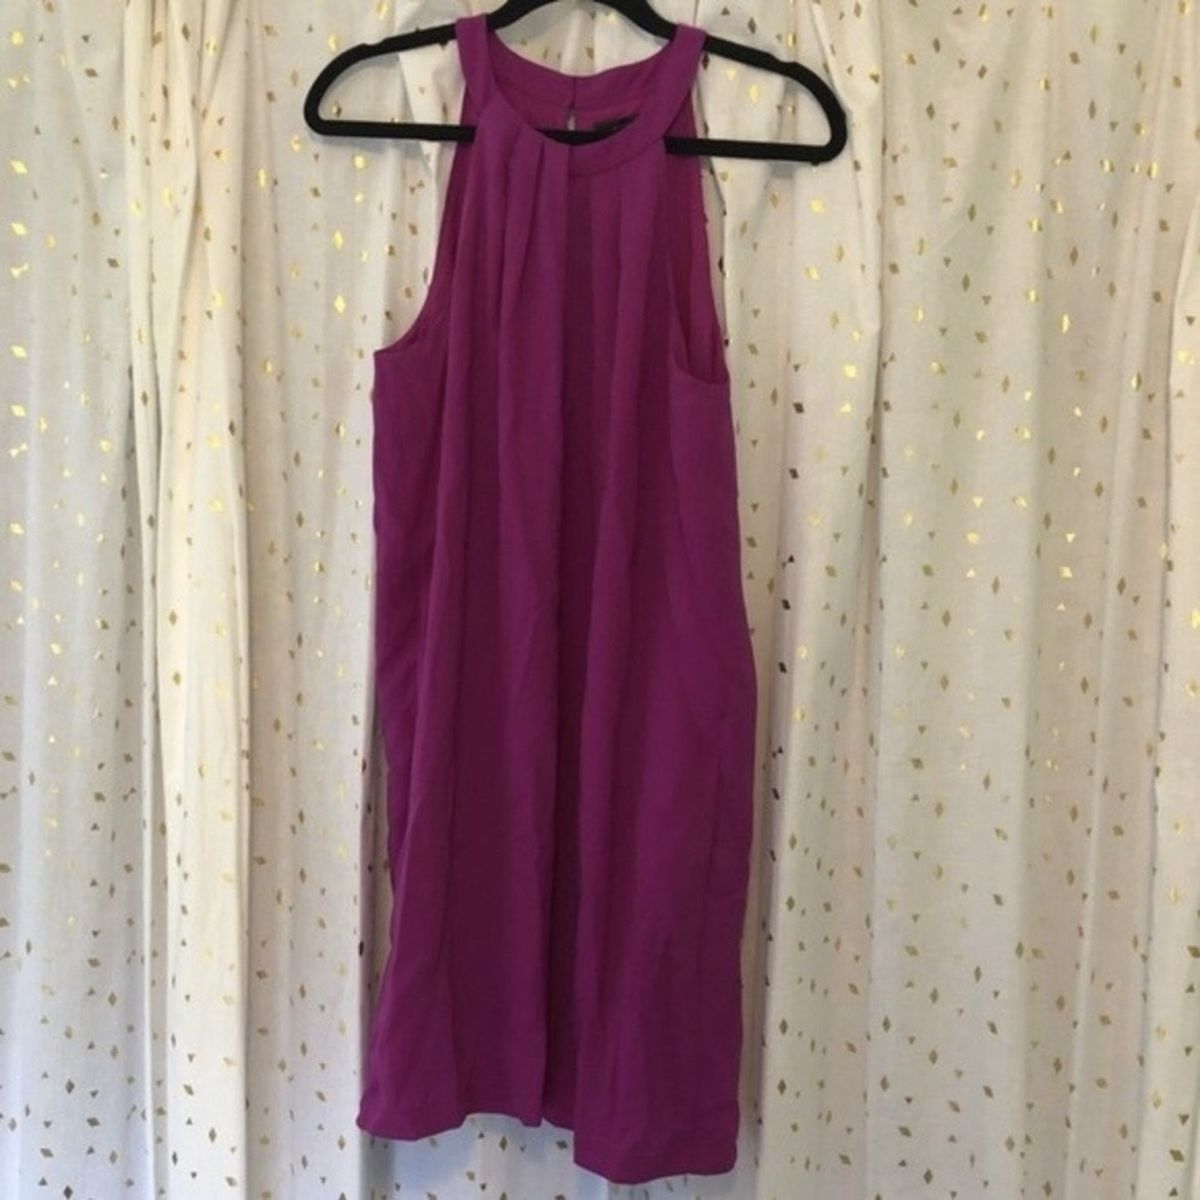 BCBG Size S High Neck Hot Pink Cocktail Dress on Queenly